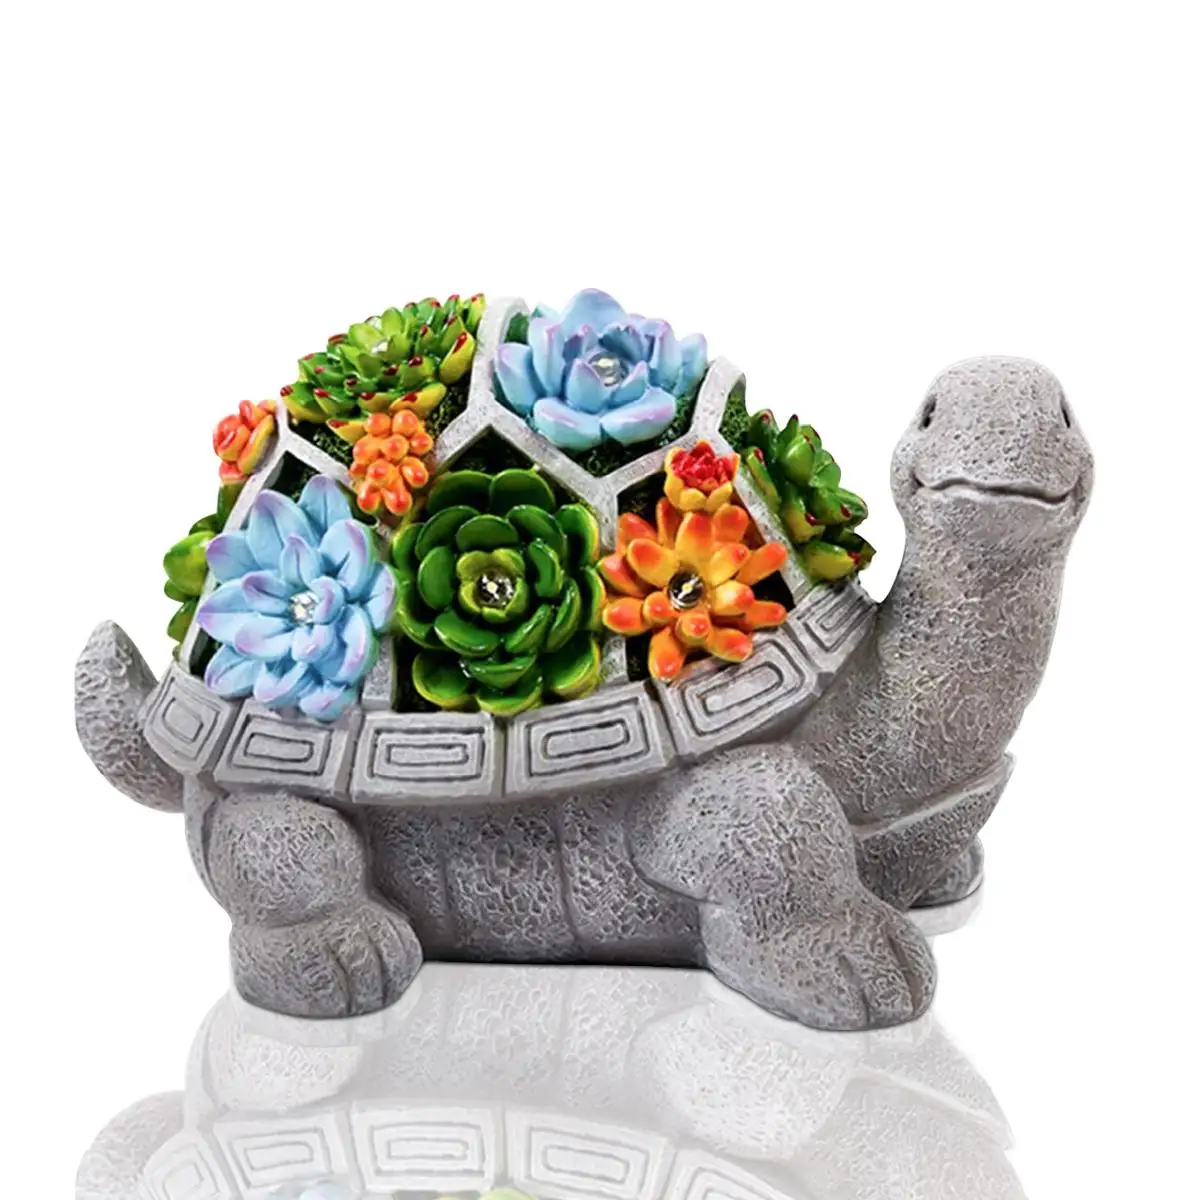 Tortoise Figurine *Turtle Statue *Reptile Sculpture *Outdoor Garden Decor *Wildlife Animal Realistic *Home Yard Ornaments *Feng Shui Gifts